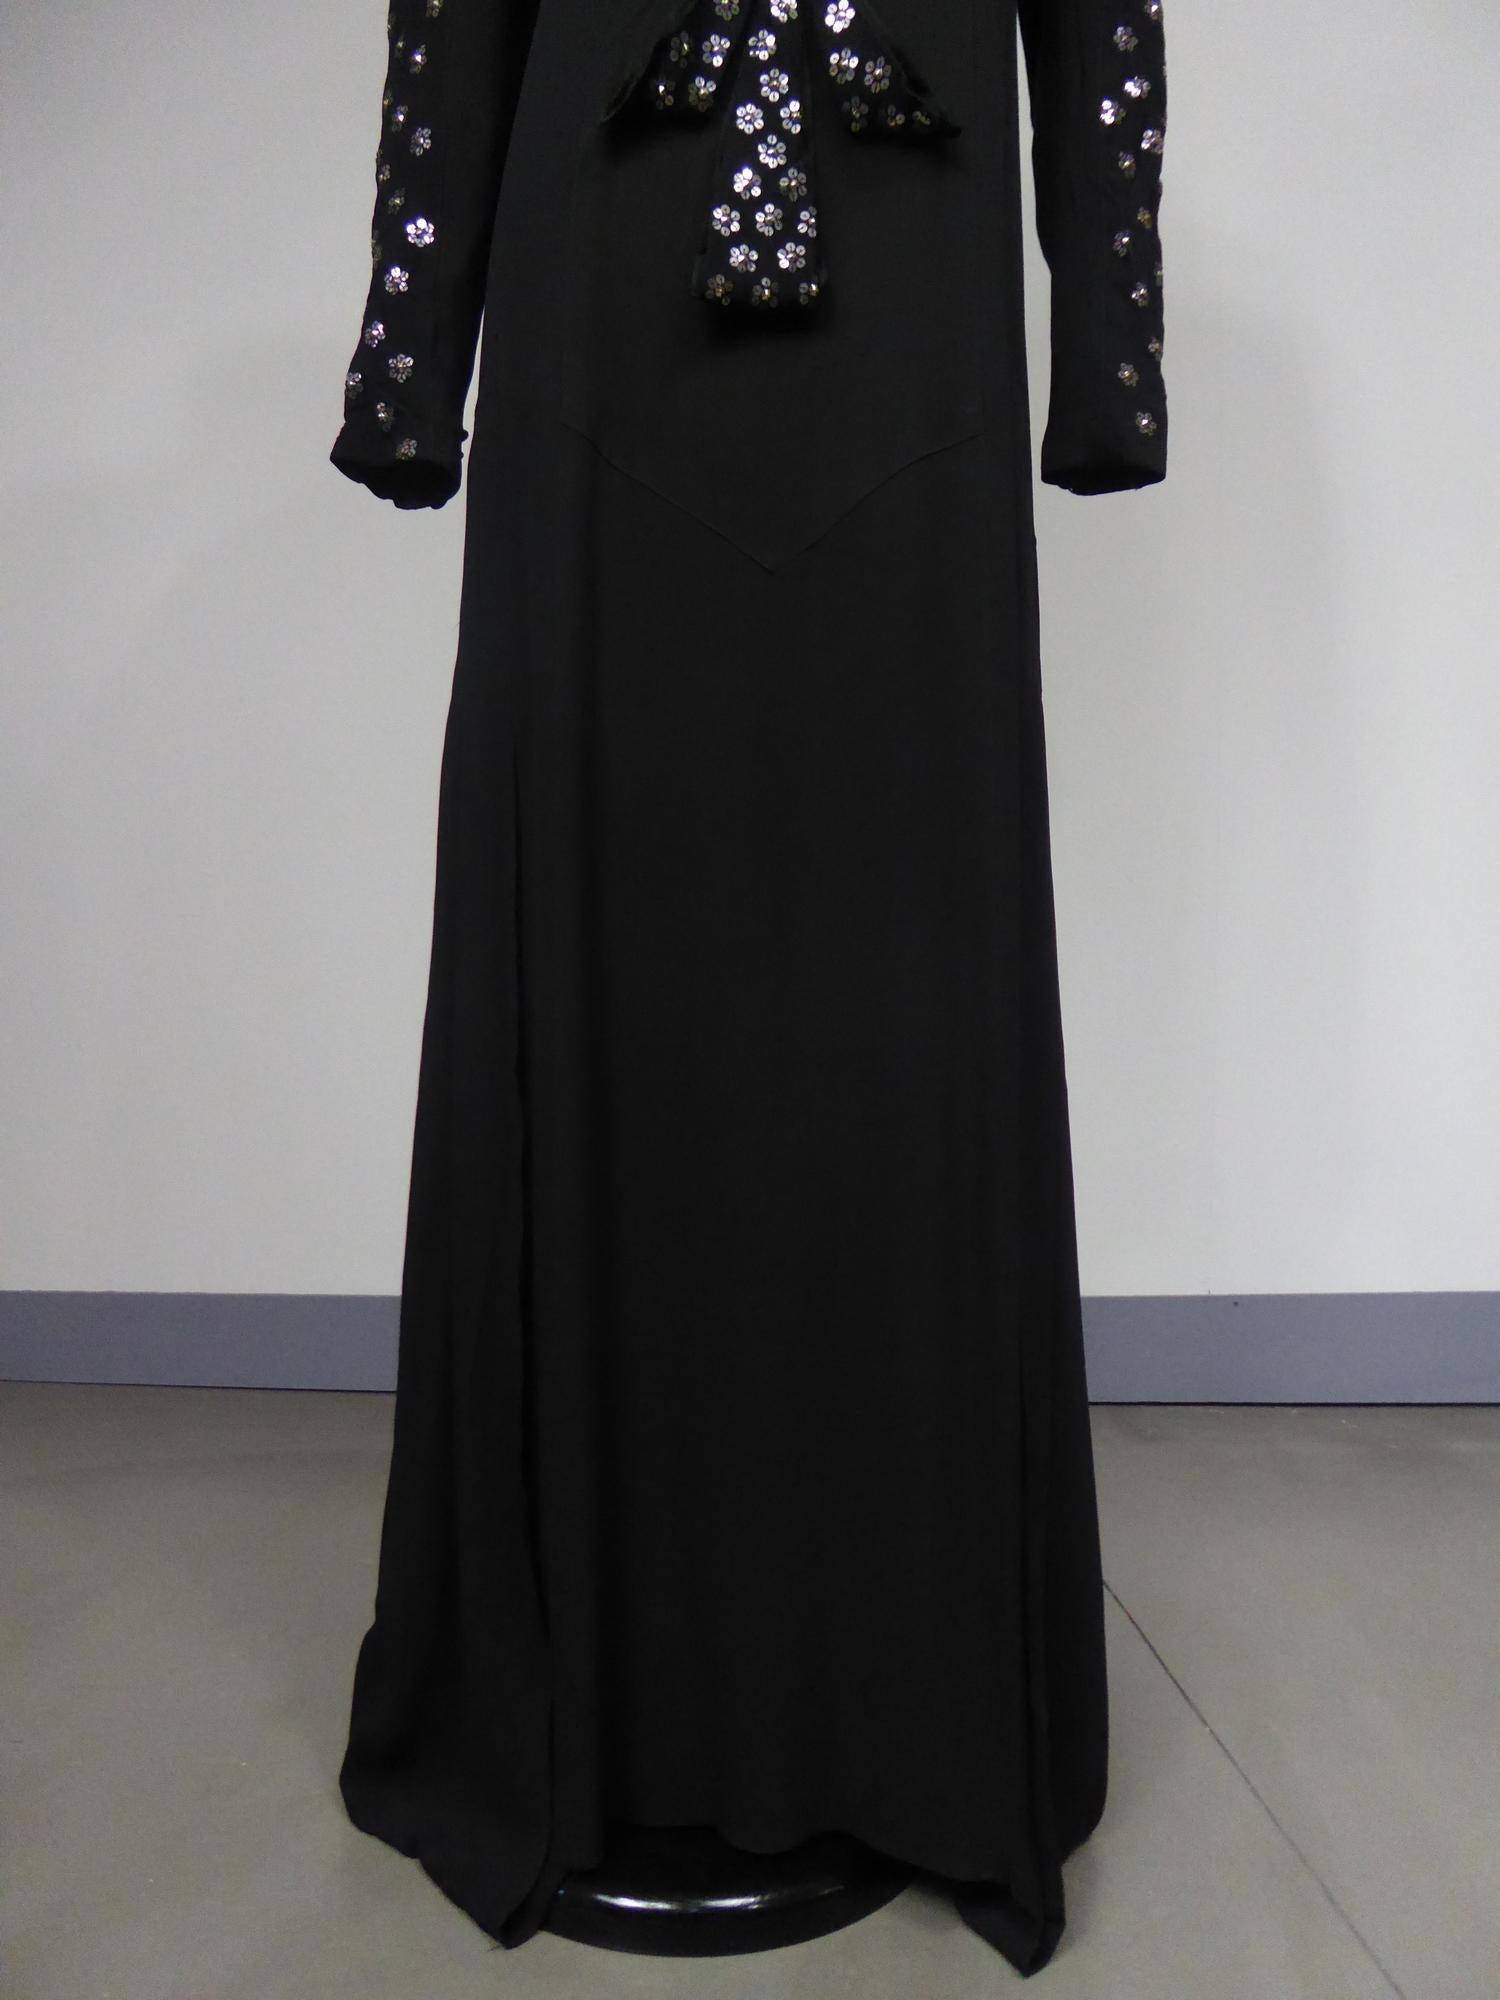 Circa 1932
France

Rare evening dress from Agnès Drecoll designer house in black silk crepe and metallic sequins from the 1930s. Straight crew-neck dress with long sleeves flaring from the hips by pleated flares cut in the bias forming a small train